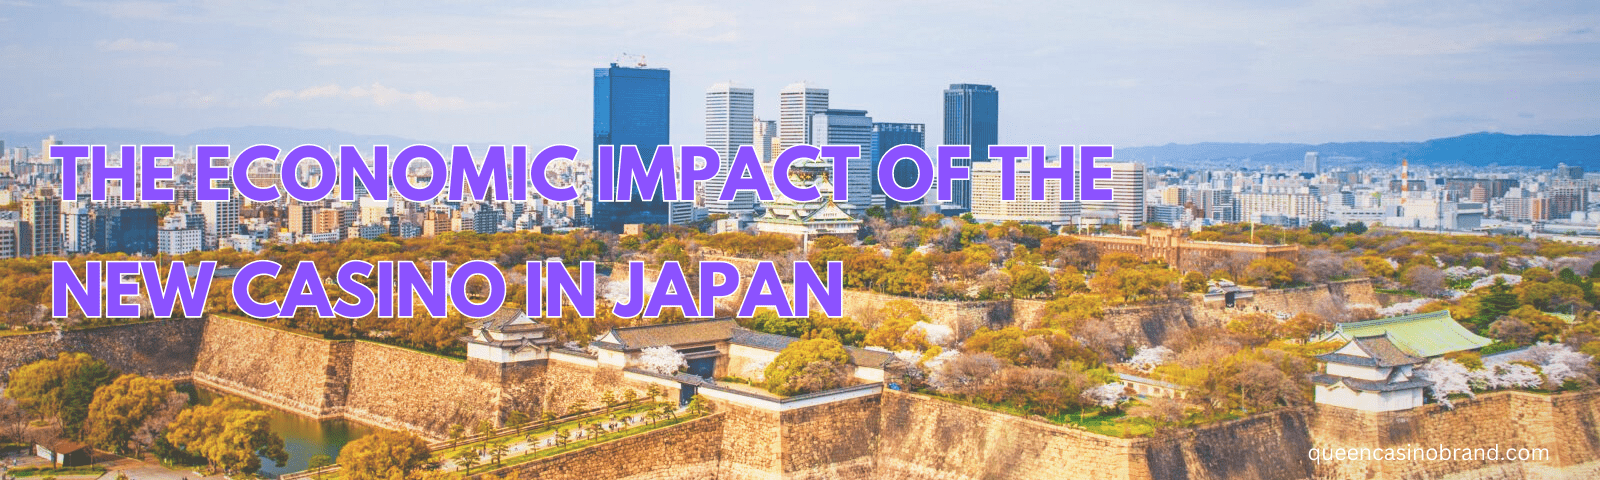 The Economic Impact of the New Casino in Japan